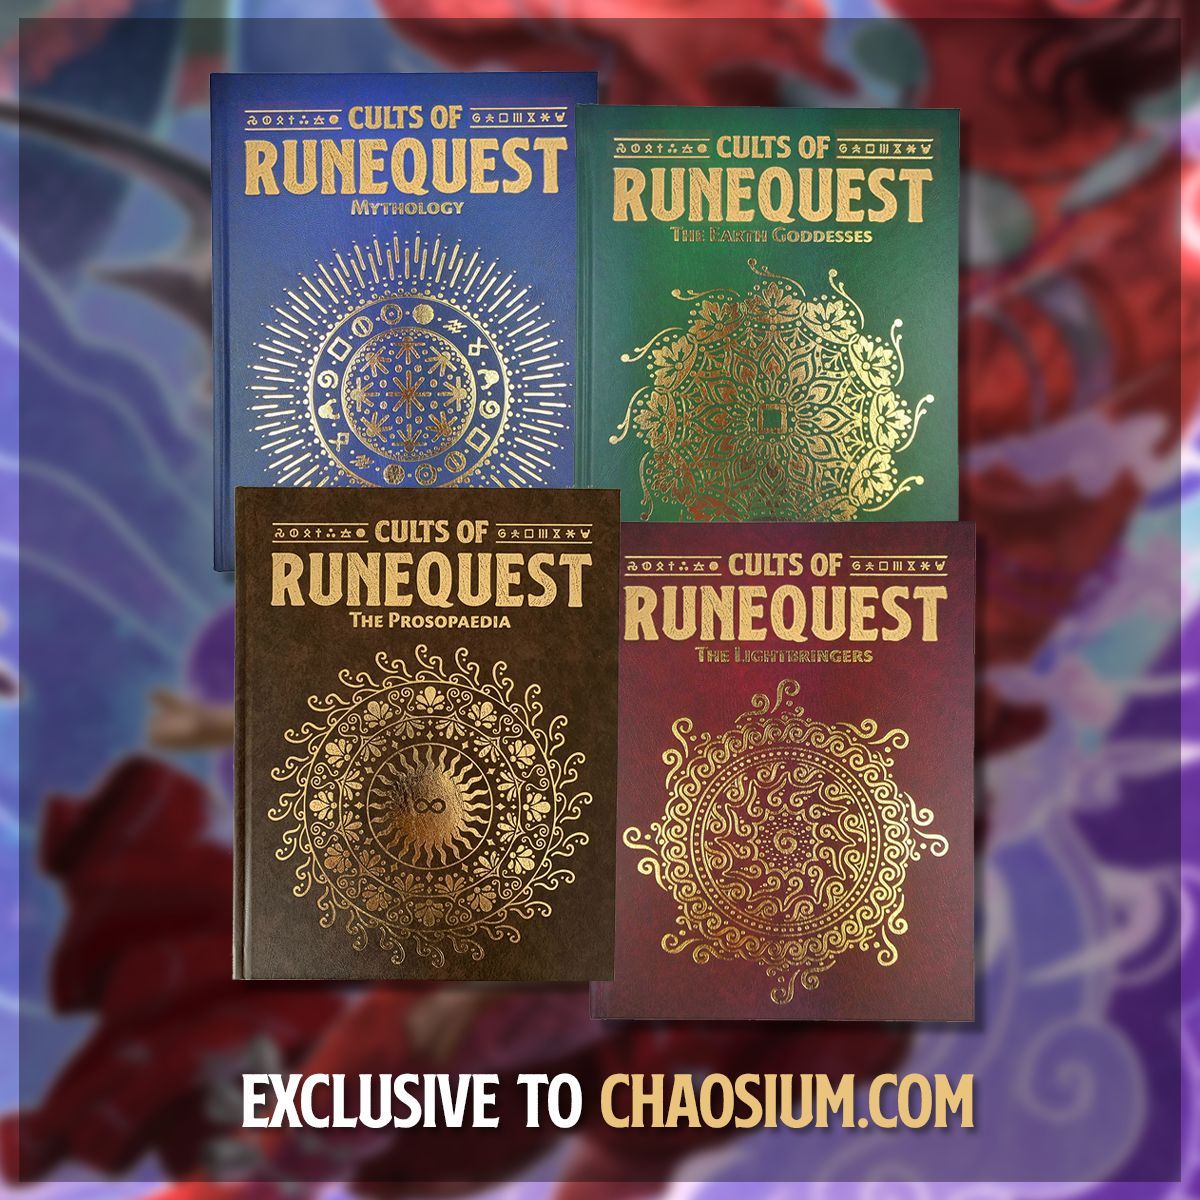 [Chaosium] Our acclaimed Cults of RuneQuest series is available now with special gorgeous embossed leatherette covers